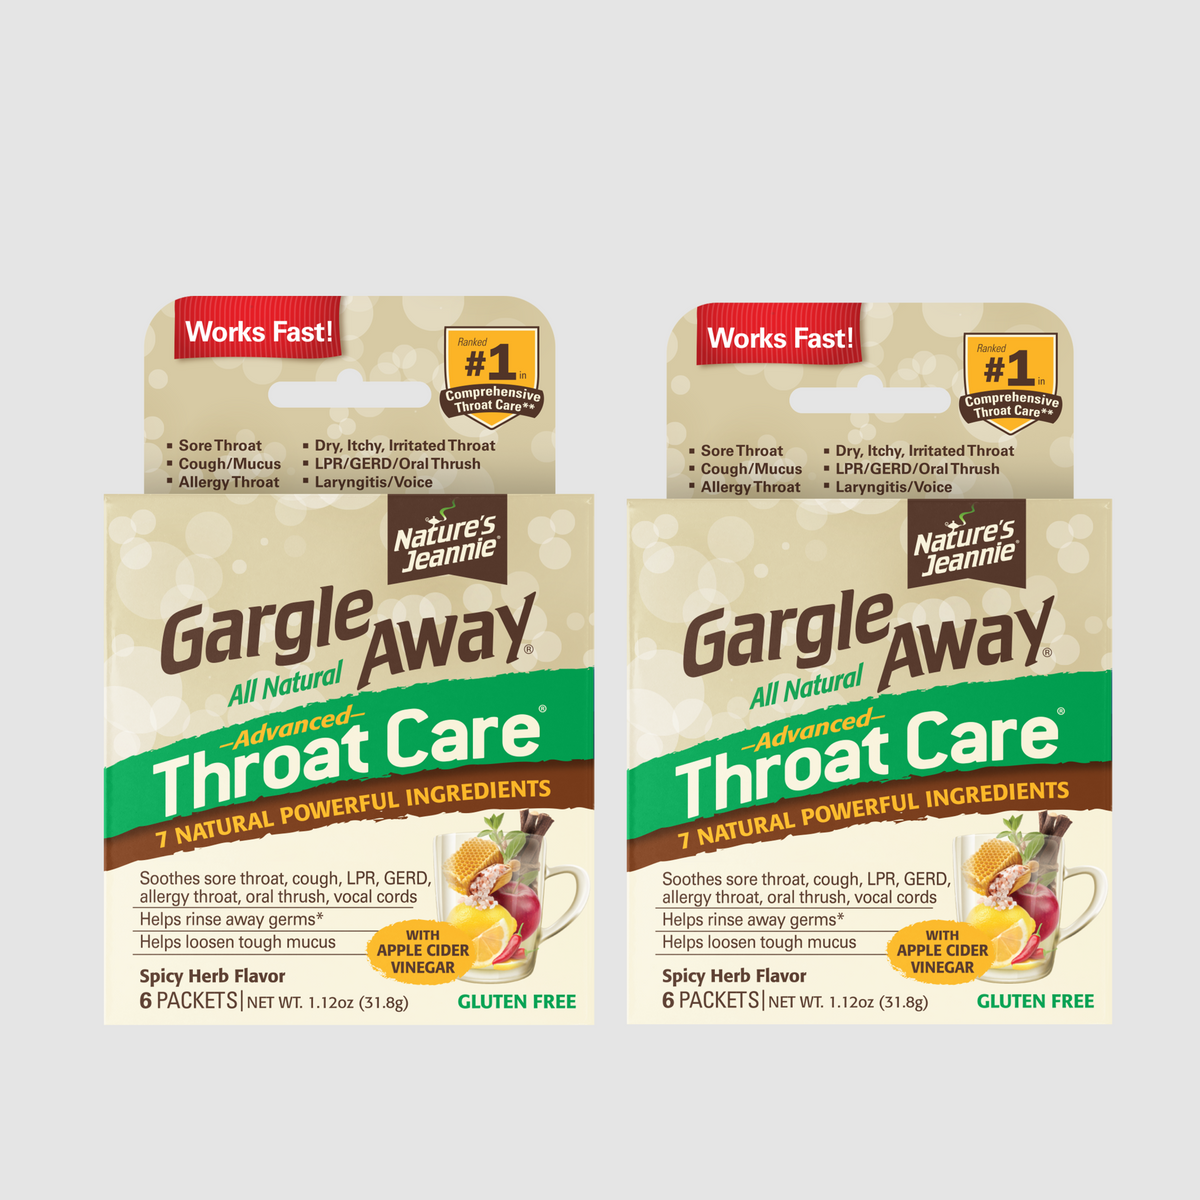 Gargle Away Throat Care packaging - two 6-CT packages side by side.